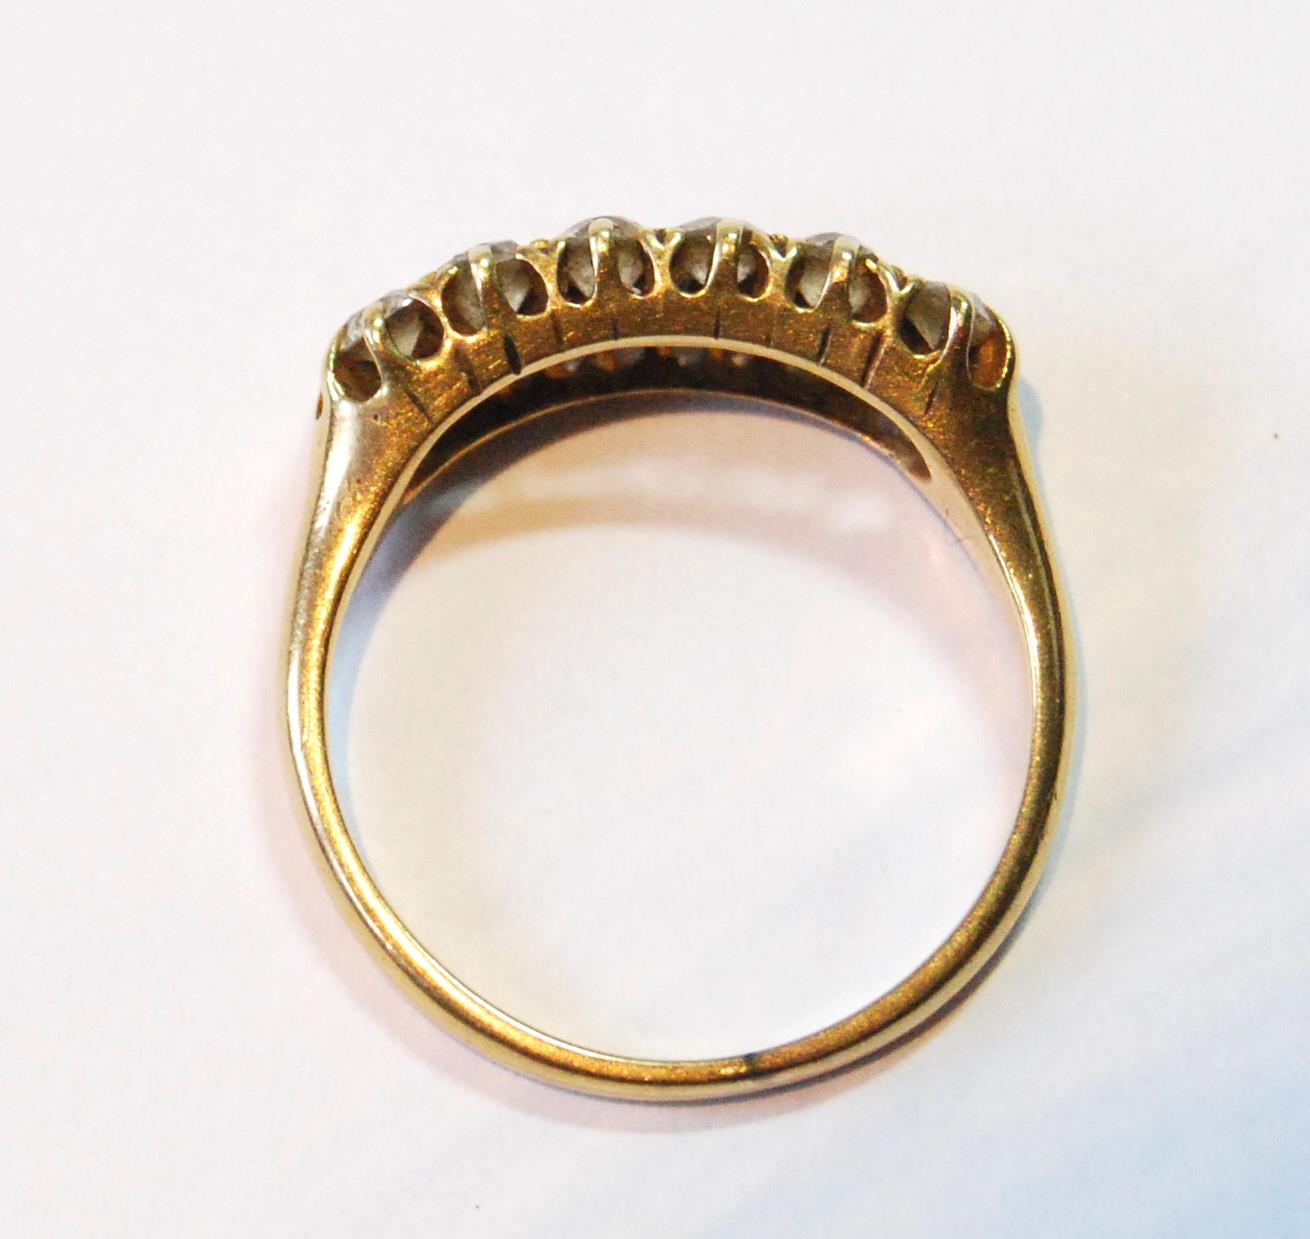 Edwardian 18ct gold ring with two rows of six old-cut diamonds, size O. - Image 2 of 3